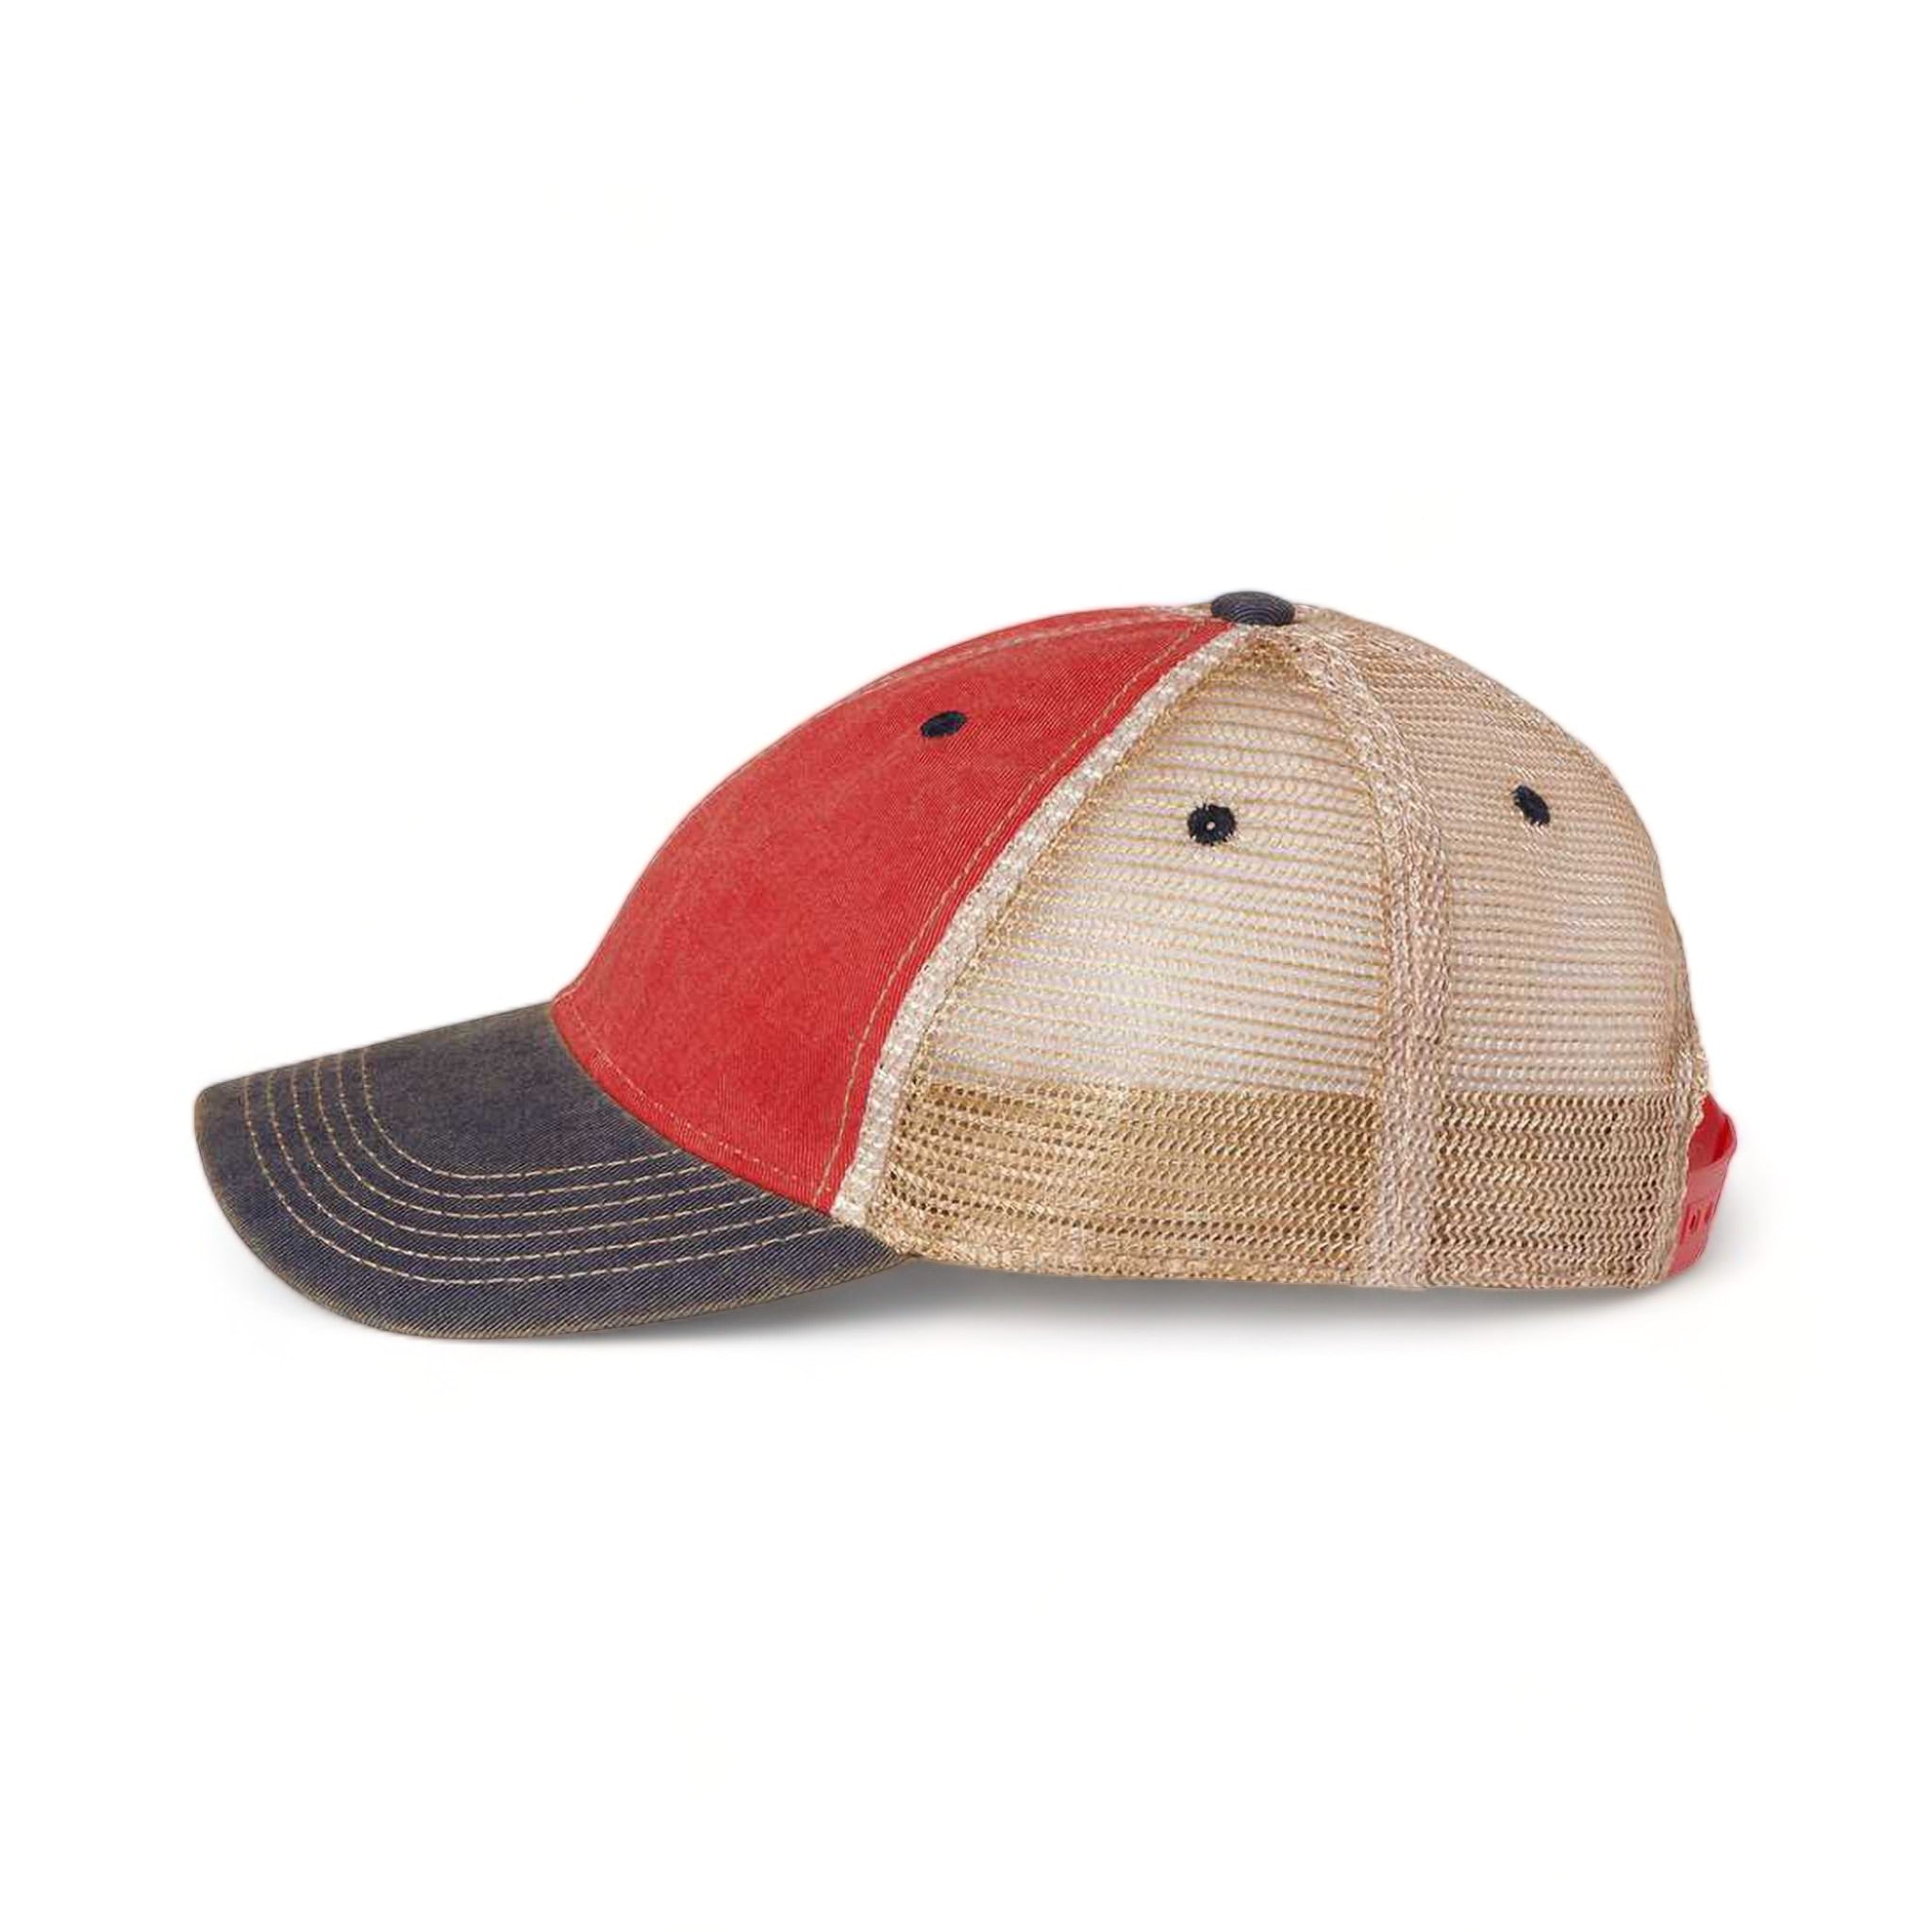 Side view of LEGACY OFA custom hat in scarlet red, navy and khaki